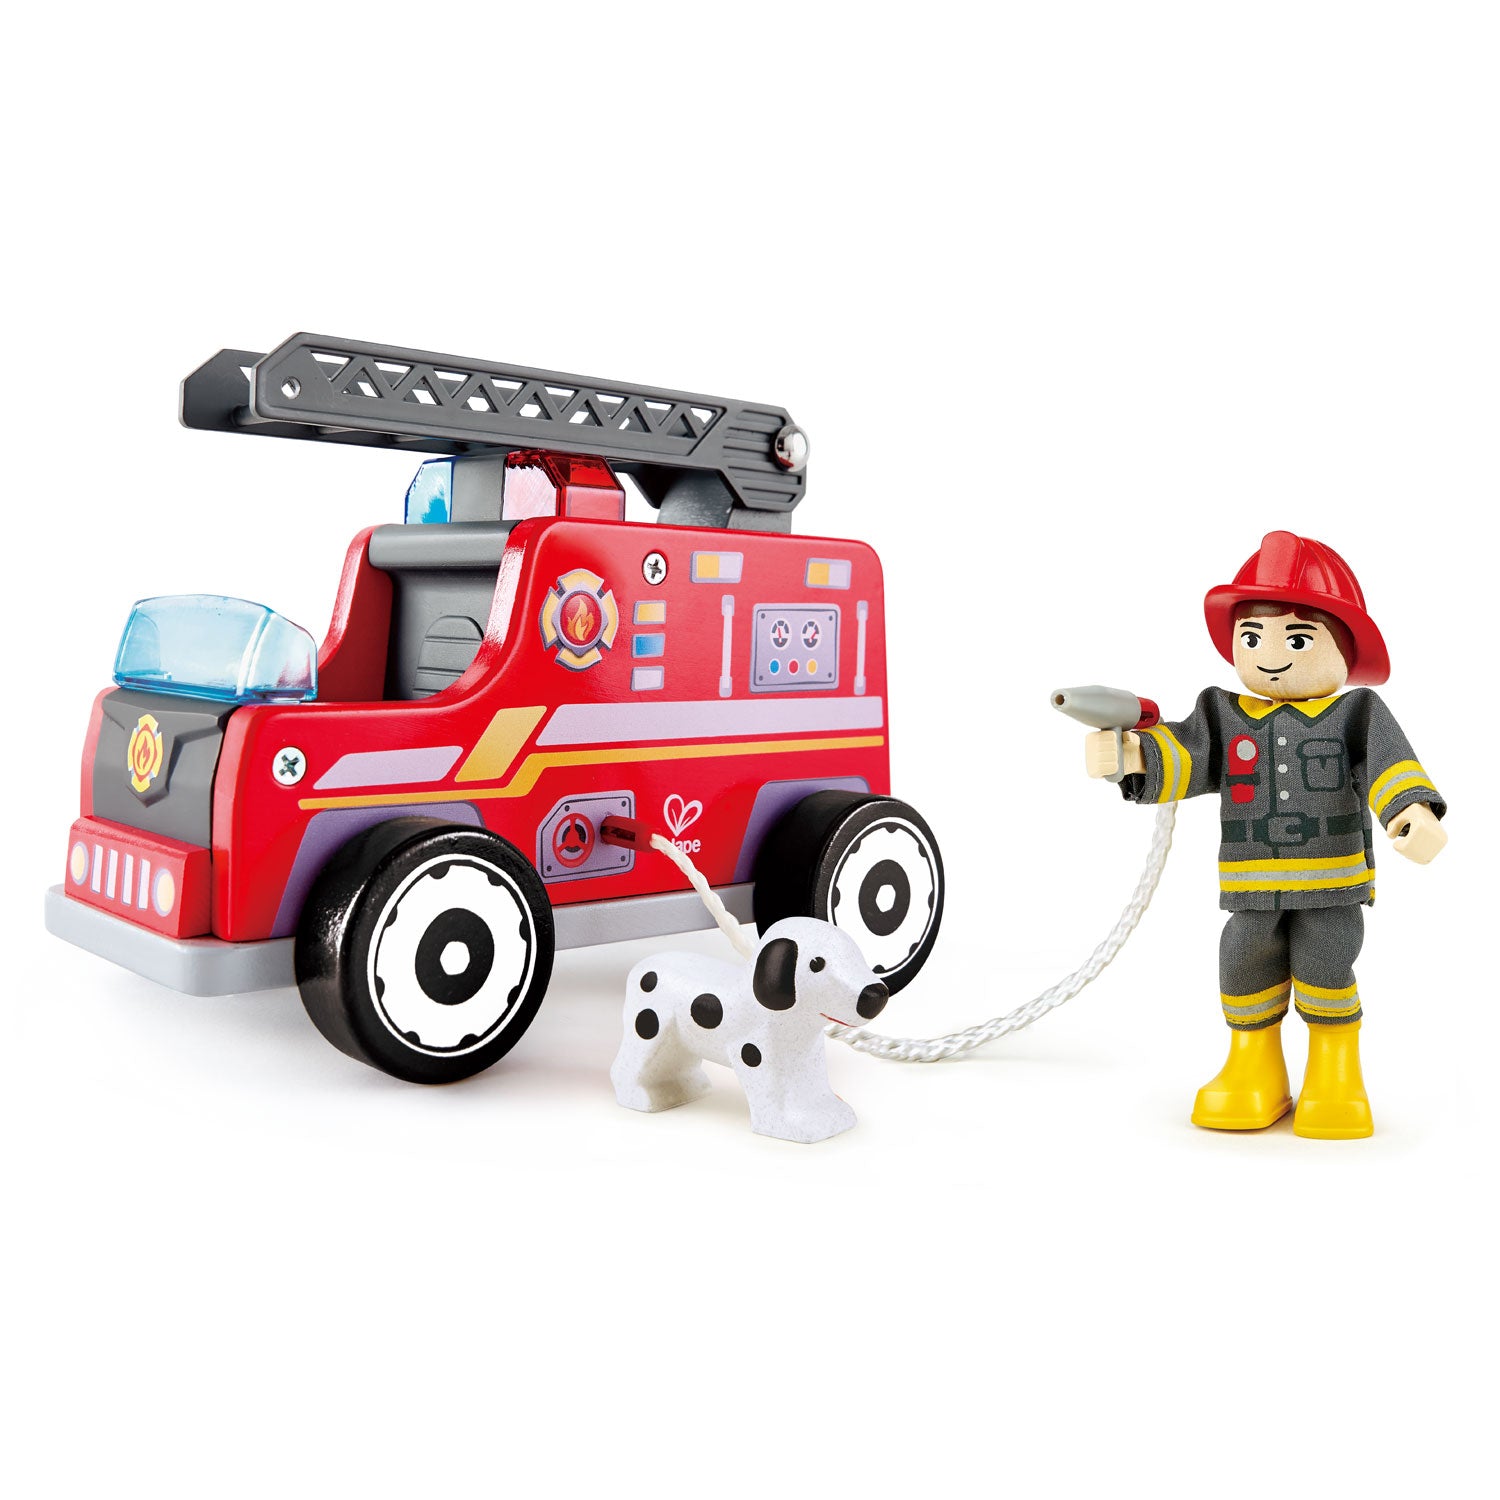 Hape Fire Truck imaginative play quality wooden toys The Toy Wagon